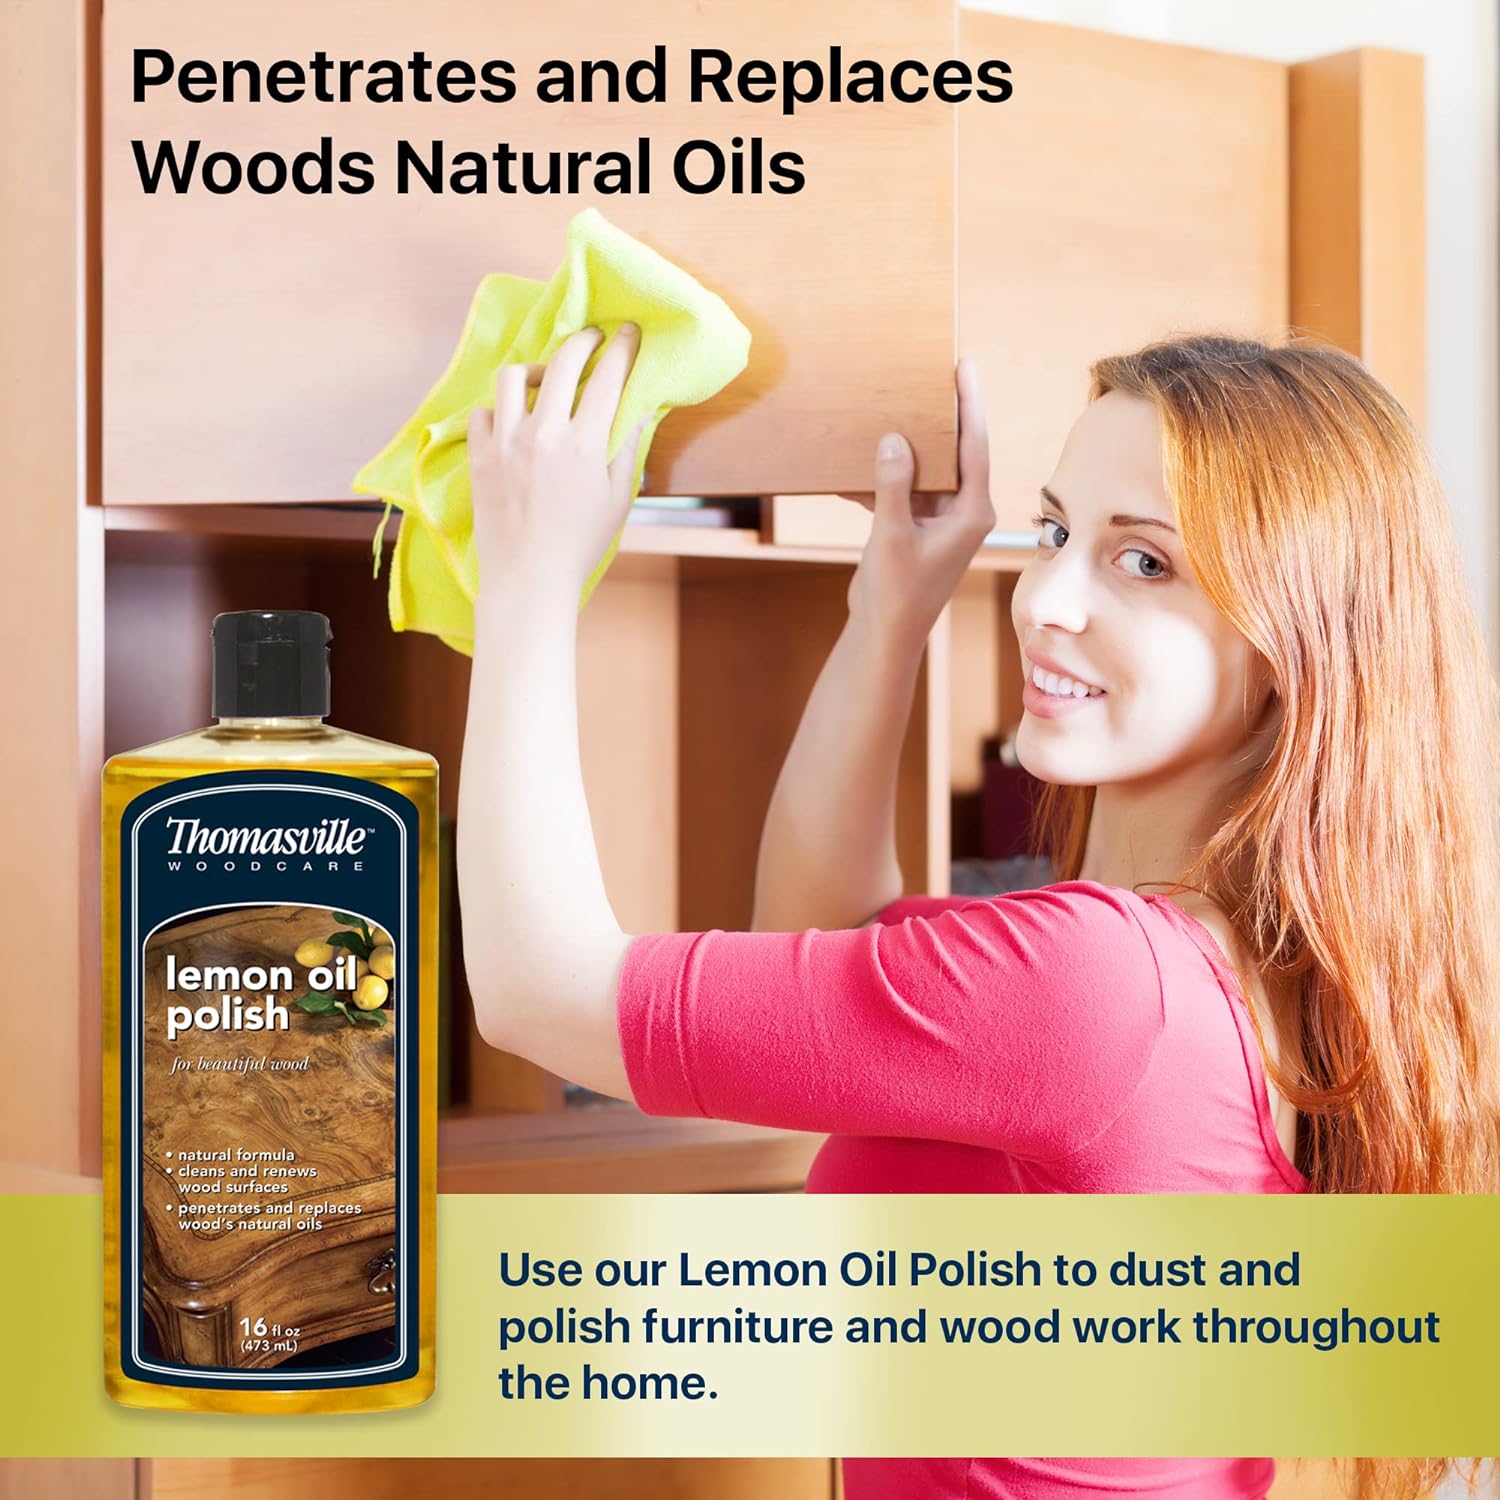 THOMASVILLE LEMON OIL POLISH - Natural Lemon Scented Wood Cleaner & Furniture Polish, Cleans, Renews, Restores & Rejuvenates Wood Surfaces, Protects Wood from Drying or Cracking, Leaves a Shiny Finish, 16oz : Health & Household